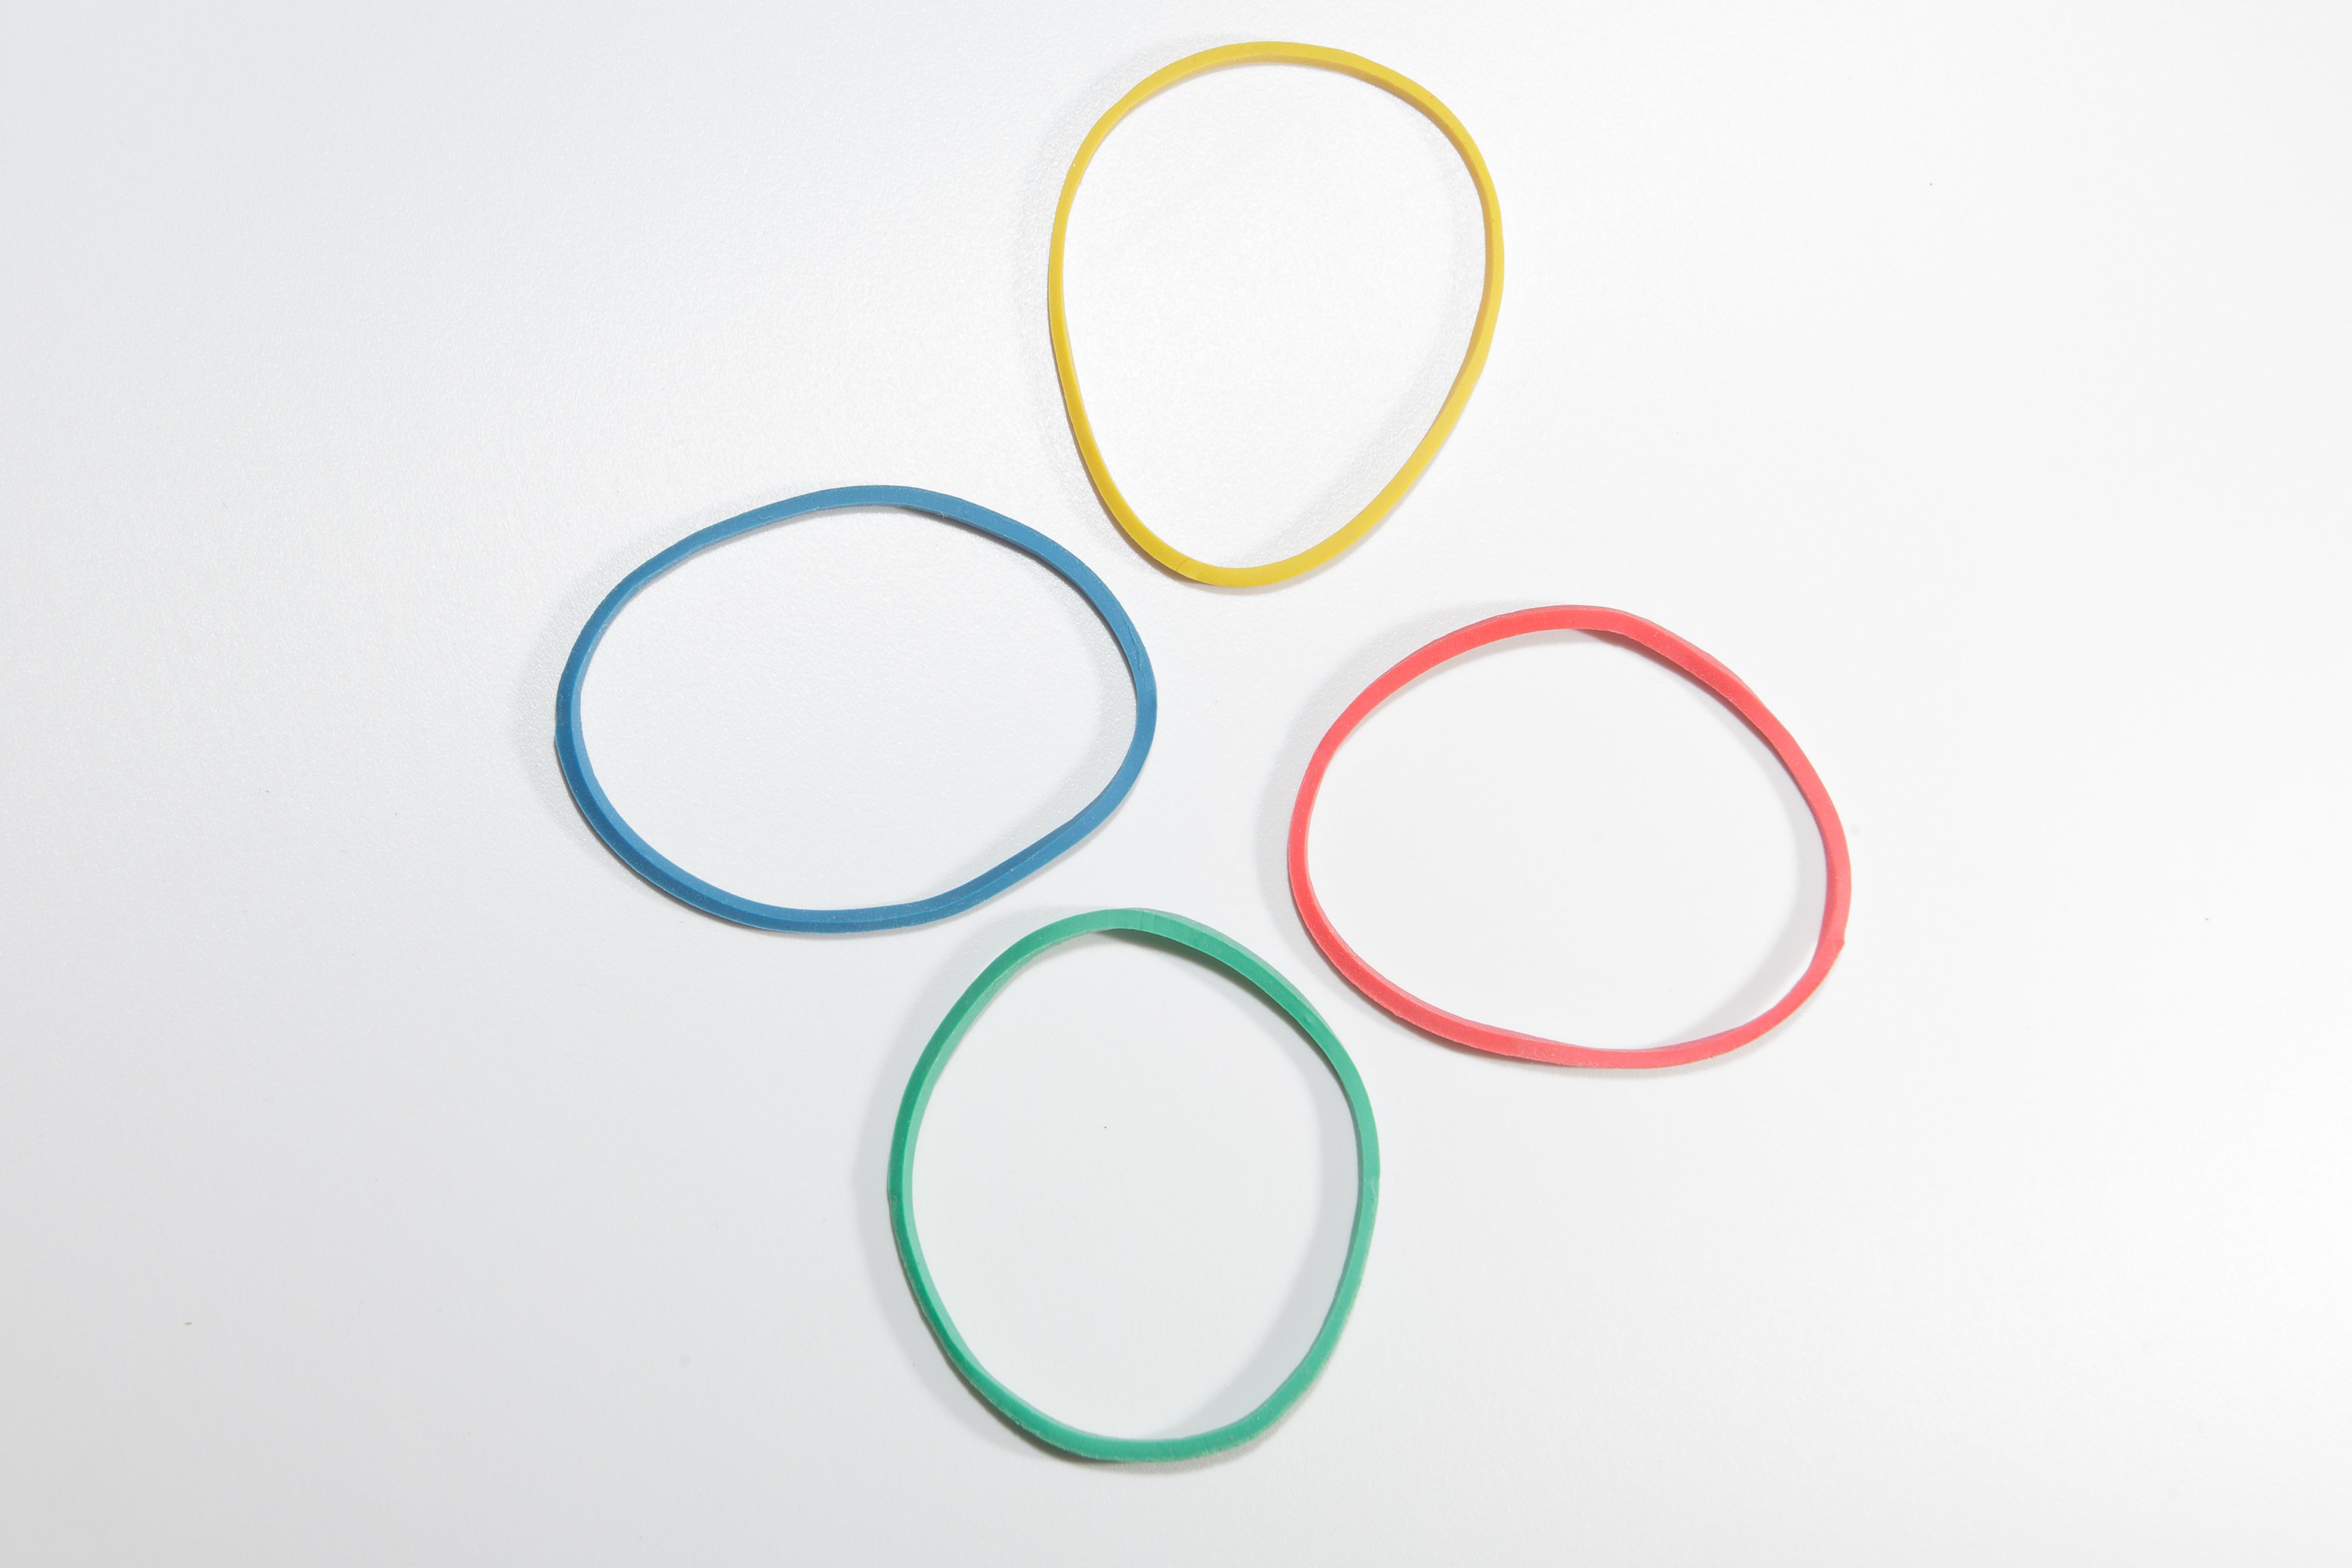 high angle view of multi colored rubber bands over white background